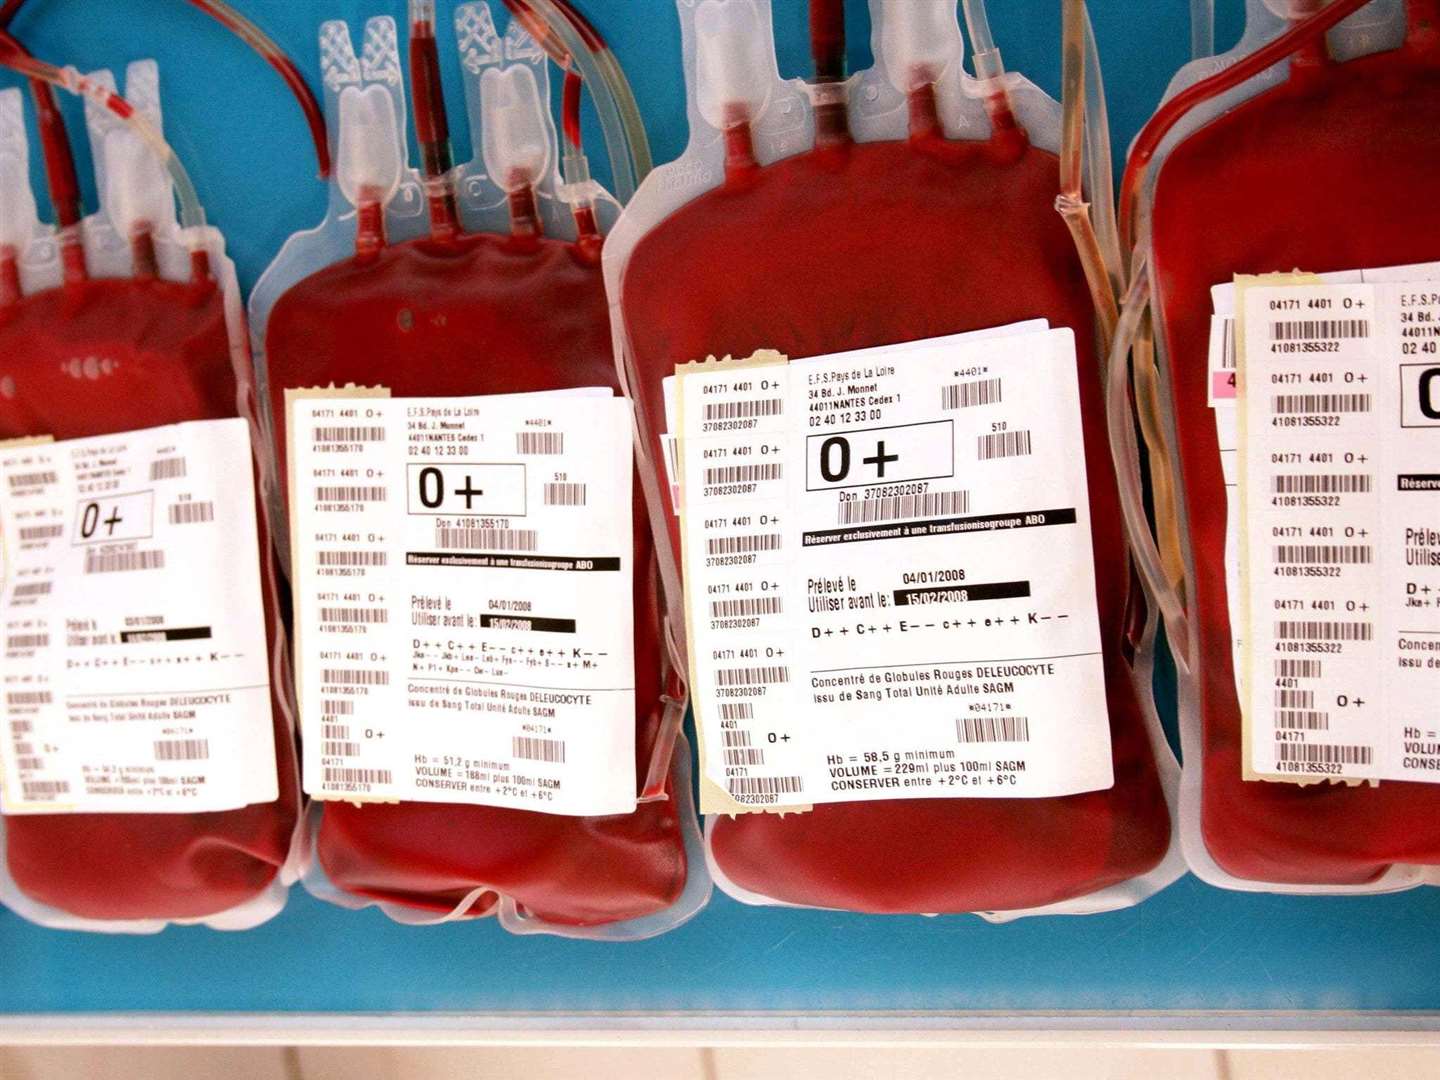 Blood supplies have dropped to critically low levels. Image: File image.